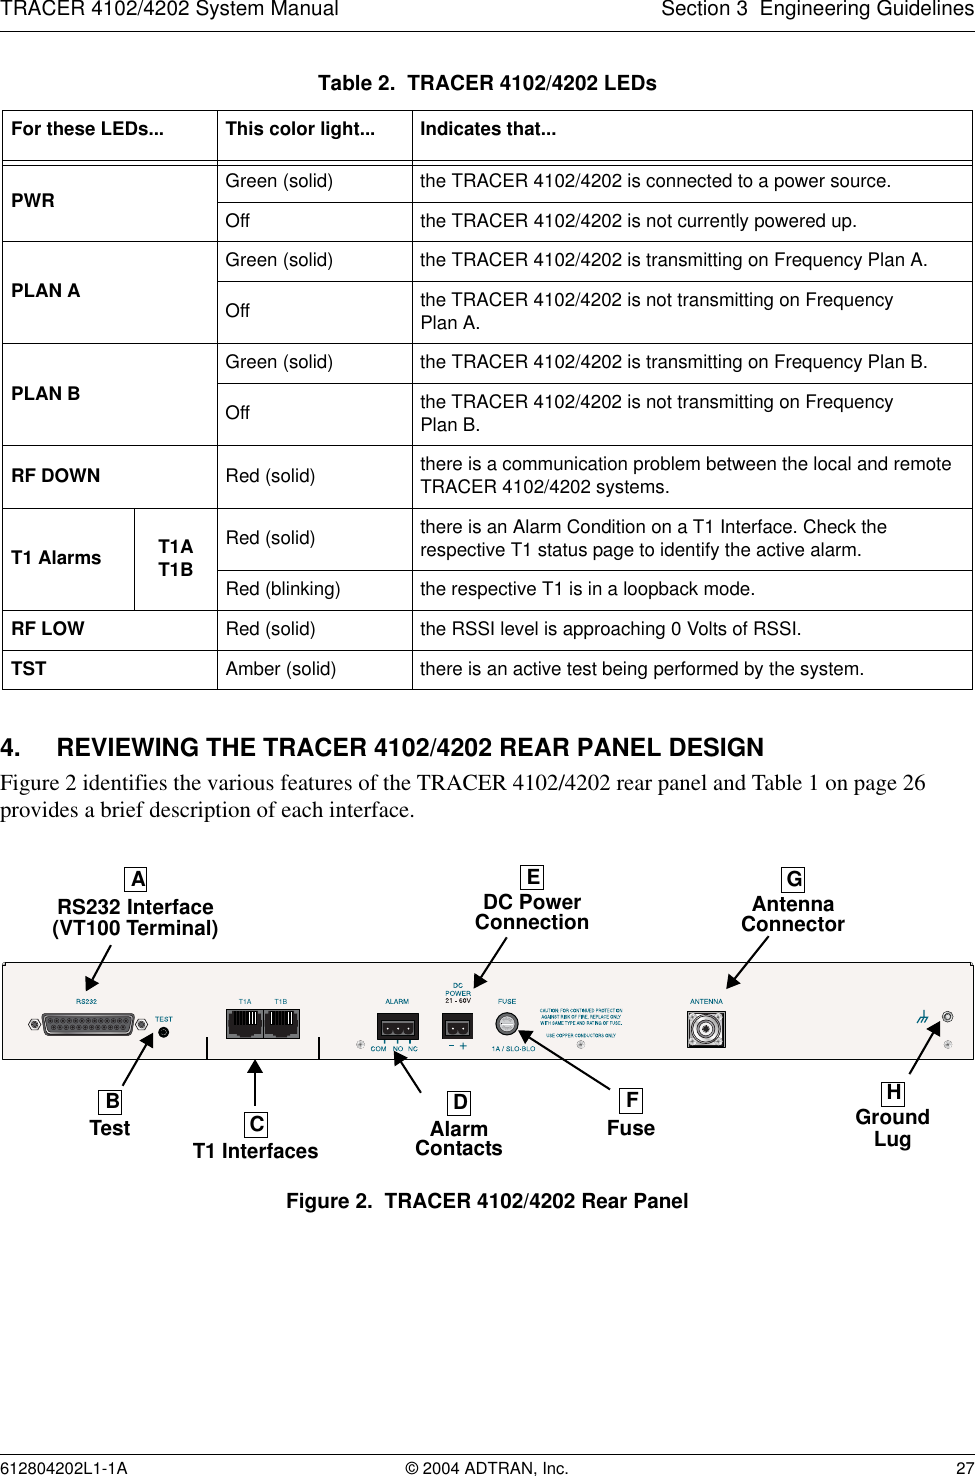 TRACER 4102/4202 System Manual Section 3  Engineering Guidelines612804202L1-1A © 2004 ADTRAN, Inc. 274. REVIEWING THE TRACER 4102/4202 REAR PANEL DESIGNFigure 2 identifies the various features of the TRACER 4102/4202 rear panel and Table 1 on page 26 provides a brief description of each interface. Figure 2.  TRACER 4102/4202 Rear PanelTable 2.  TRACER 4102/4202 LEDsFor these LEDs... This color light... Indicates that...PWR Green (solid) the TRACER 4102/4202 is connected to a power source.Off the TRACER 4102/4202 is not currently powered up.PLAN AGreen (solid) the TRACER 4102/4202 is transmitting on Frequency Plan A.Off the TRACER 4102/4202 is not transmitting on Frequency Plan A.PLAN BGreen (solid) the TRACER 4102/4202 is transmitting on Frequency Plan B.Off the TRACER 4102/4202 is not transmitting on FrequencyPlan B.RF DOWN Red (solid) there is a communication problem between the local and remote TRACER 4102/4202 systems.T1 Alarms T1AT1BRed (solid) there is an Alarm Condition on a T1 Interface. Check the respective T1 status page to identify the active alarm.Red (blinking) the respective T1 is in a loopback mode.RF LOW Red (solid) the RSSI level is approaching 0 Volts of RSSI.TST Amber (solid) there is an active test being performed by the system.T1A T1BAAntennaDC PowerConnection ConnectorT1 InterfacesRS232 Interface(VT100 Terminal)GroundLugFuseAlarmContactsTestEGBCDFH